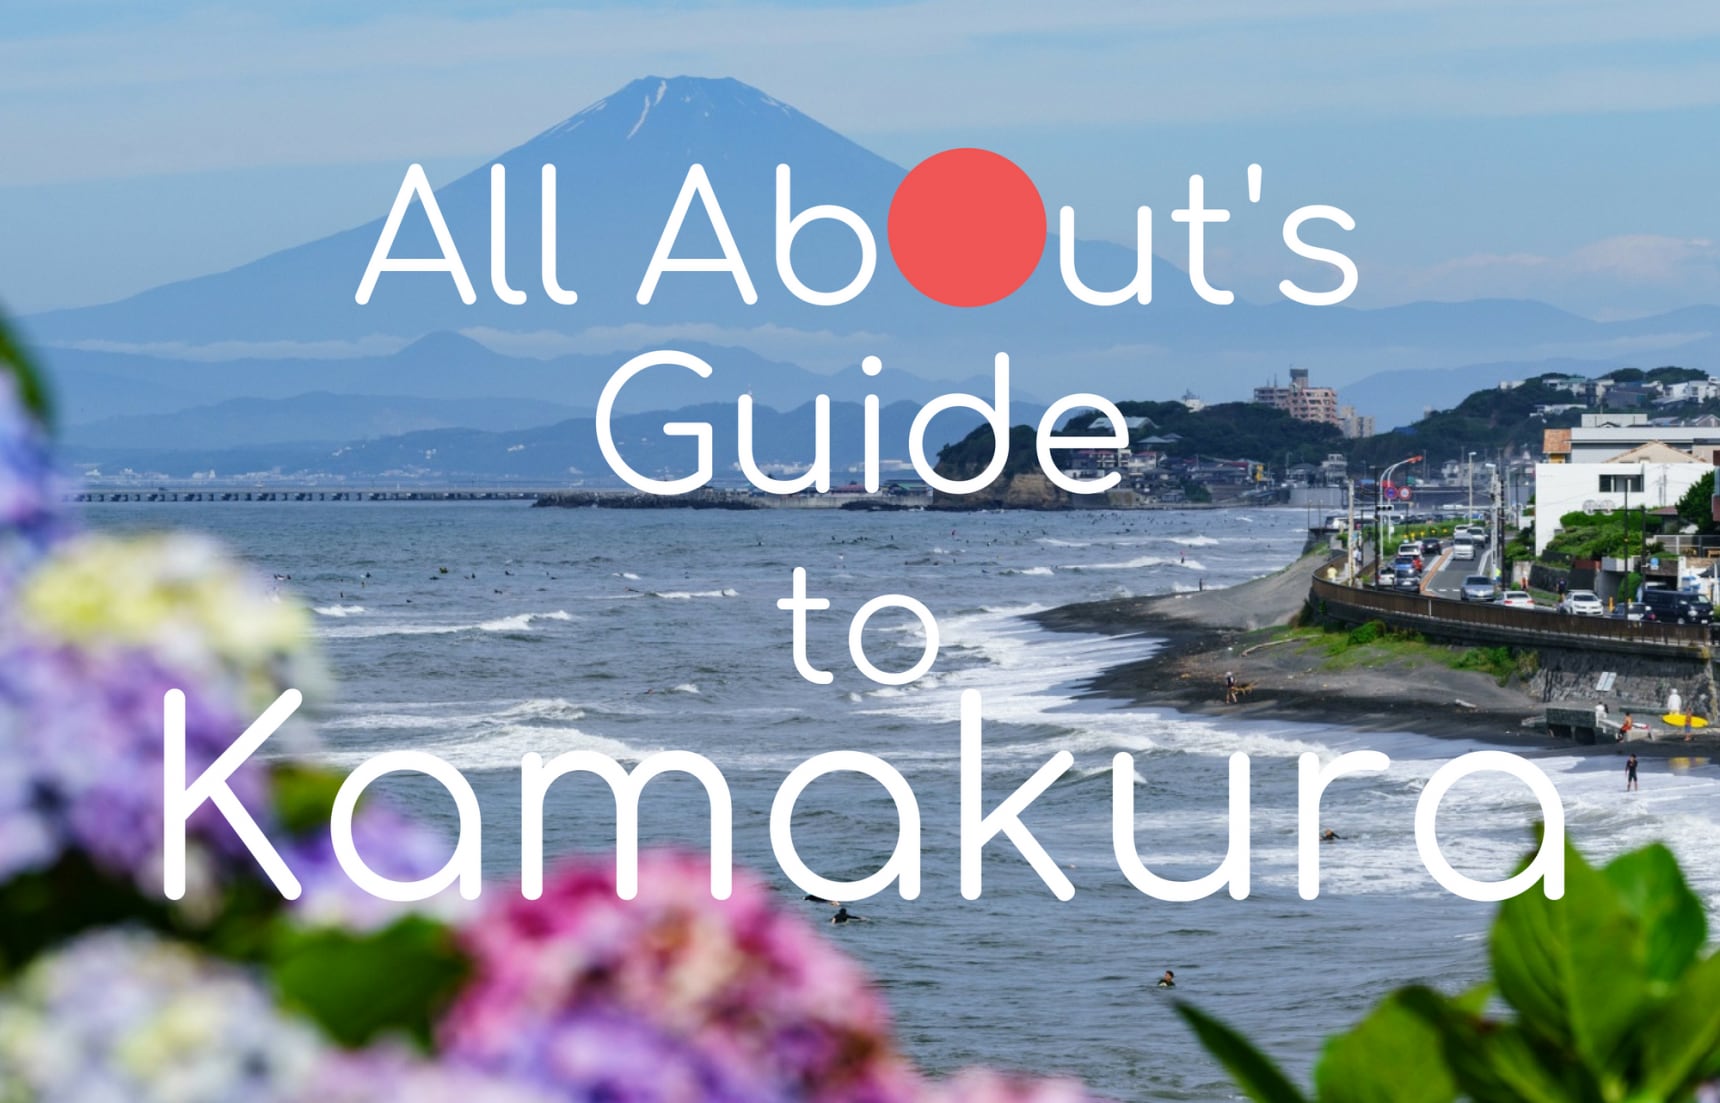 All About's Guide to Kamakura